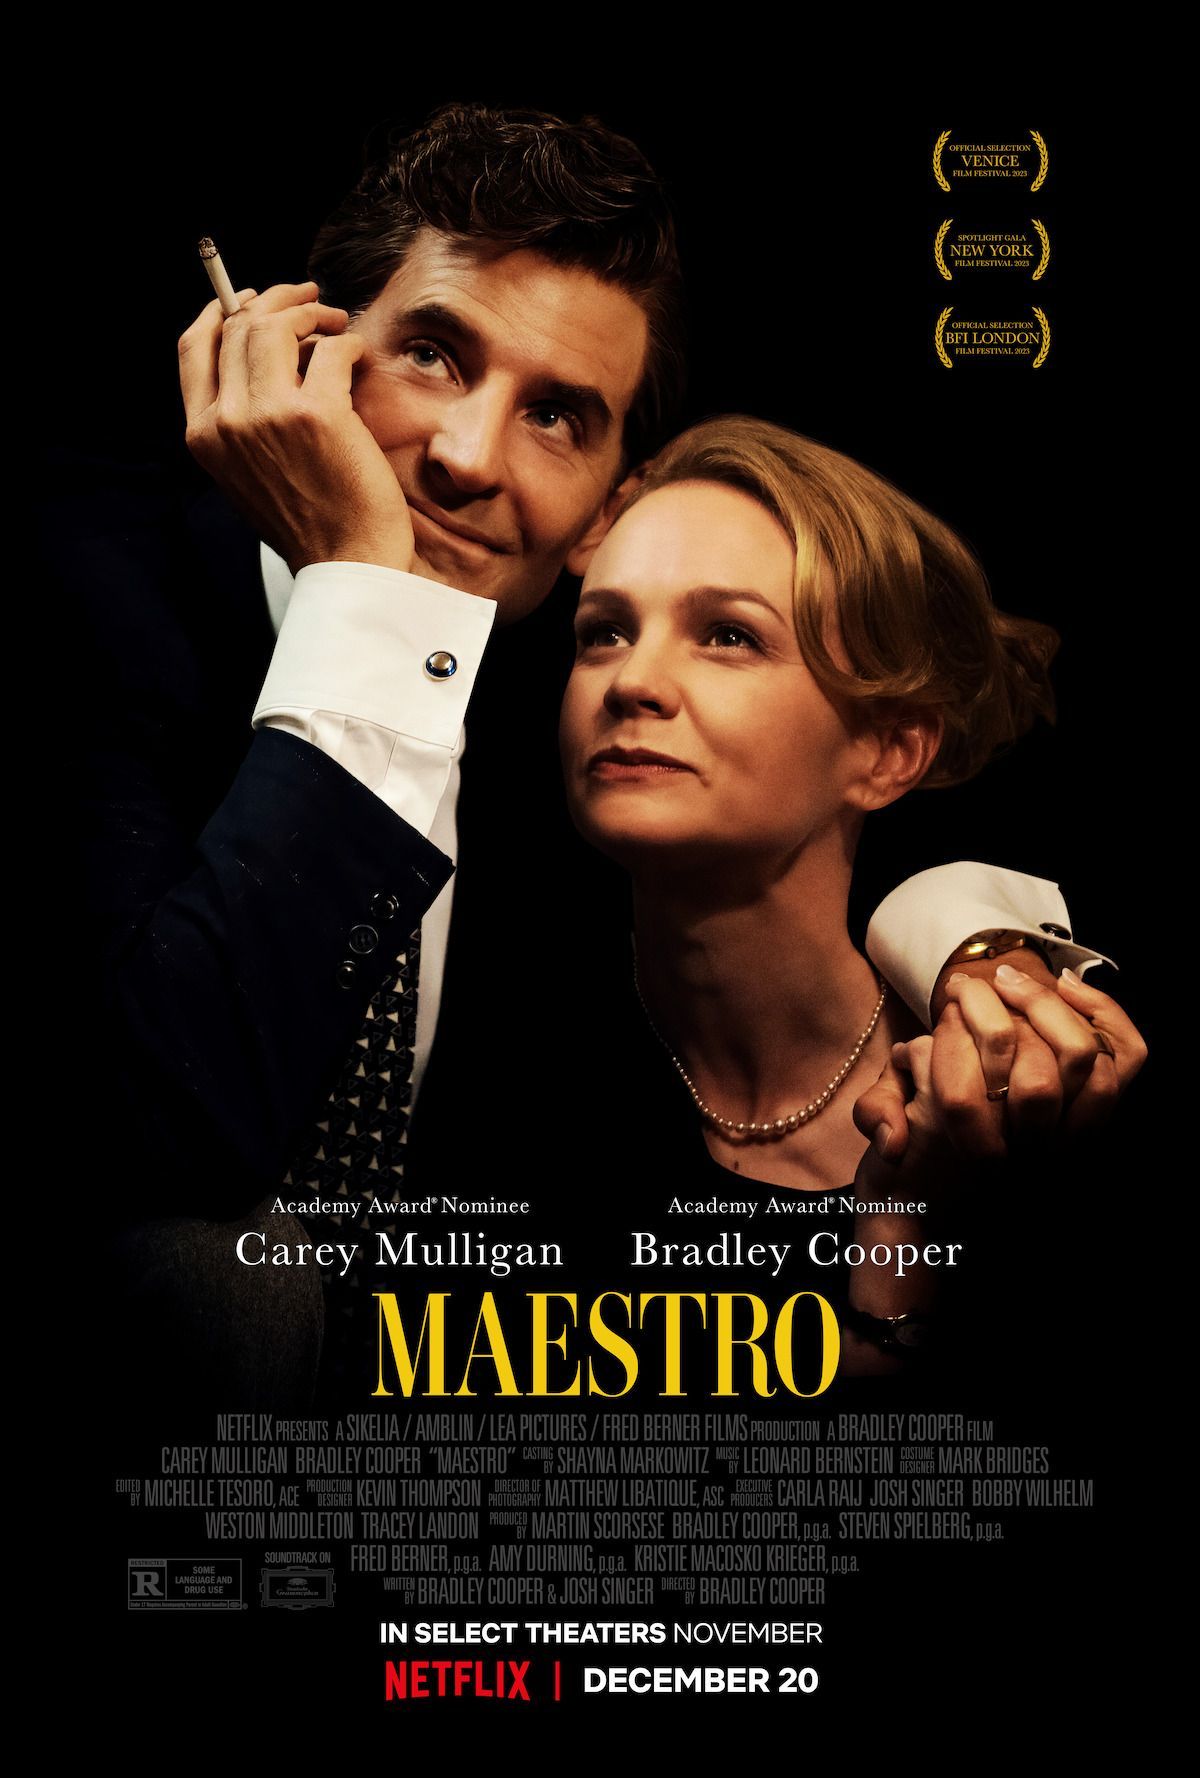 Waving or Drowning: On Bradley Cooper’s “Maestro”